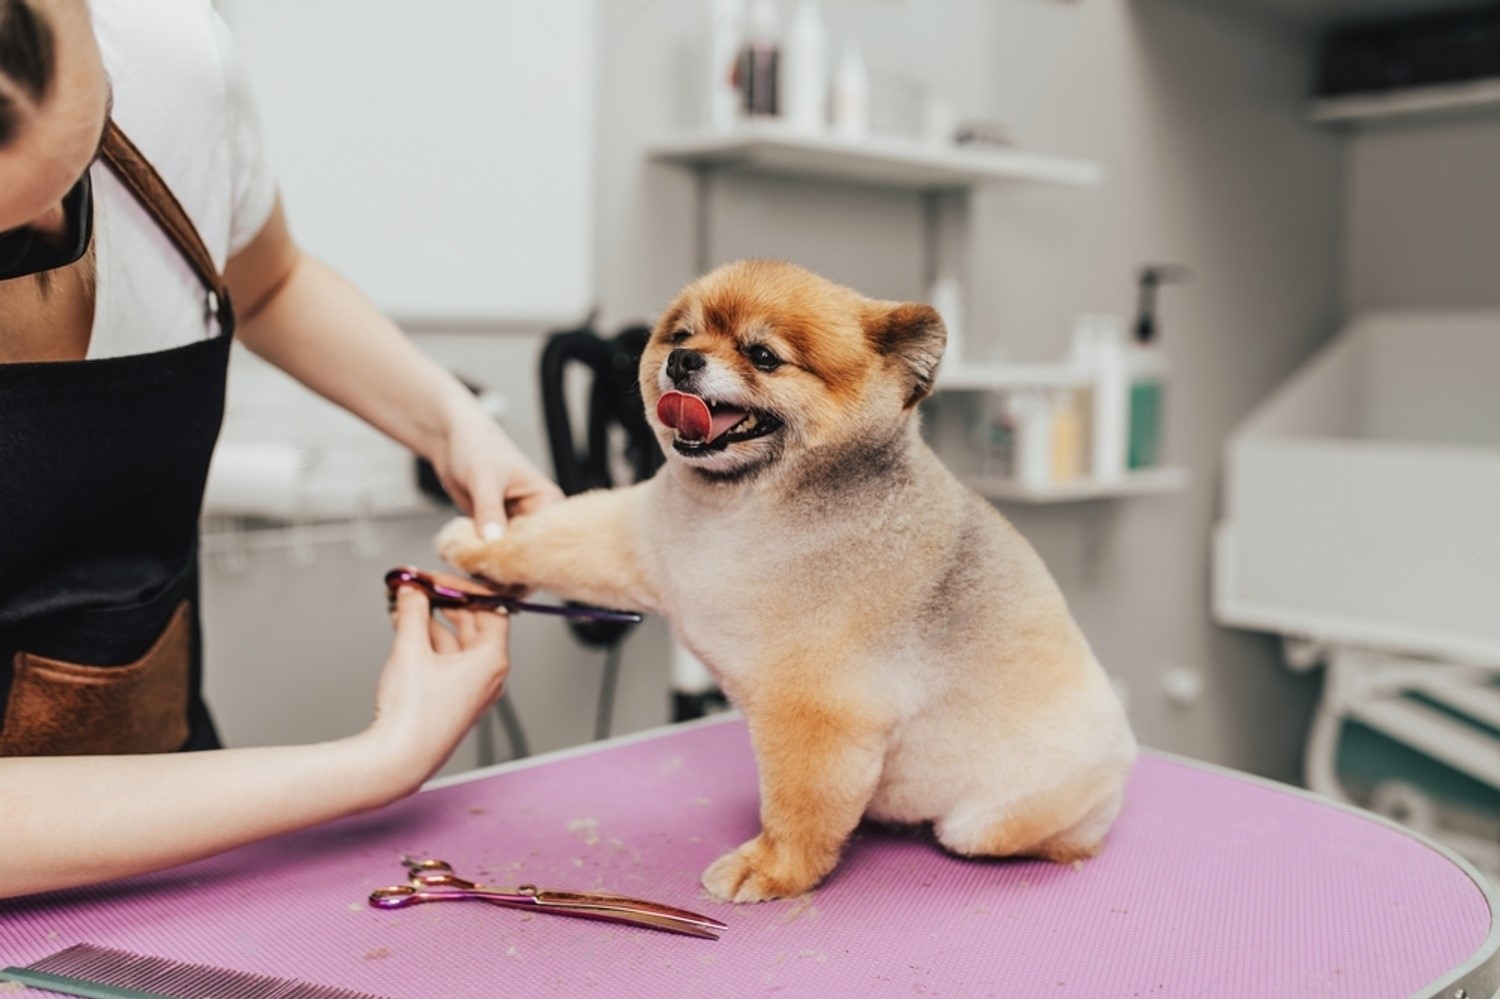 How to Groom a Dog That Bites: Expert Tips and Techniques